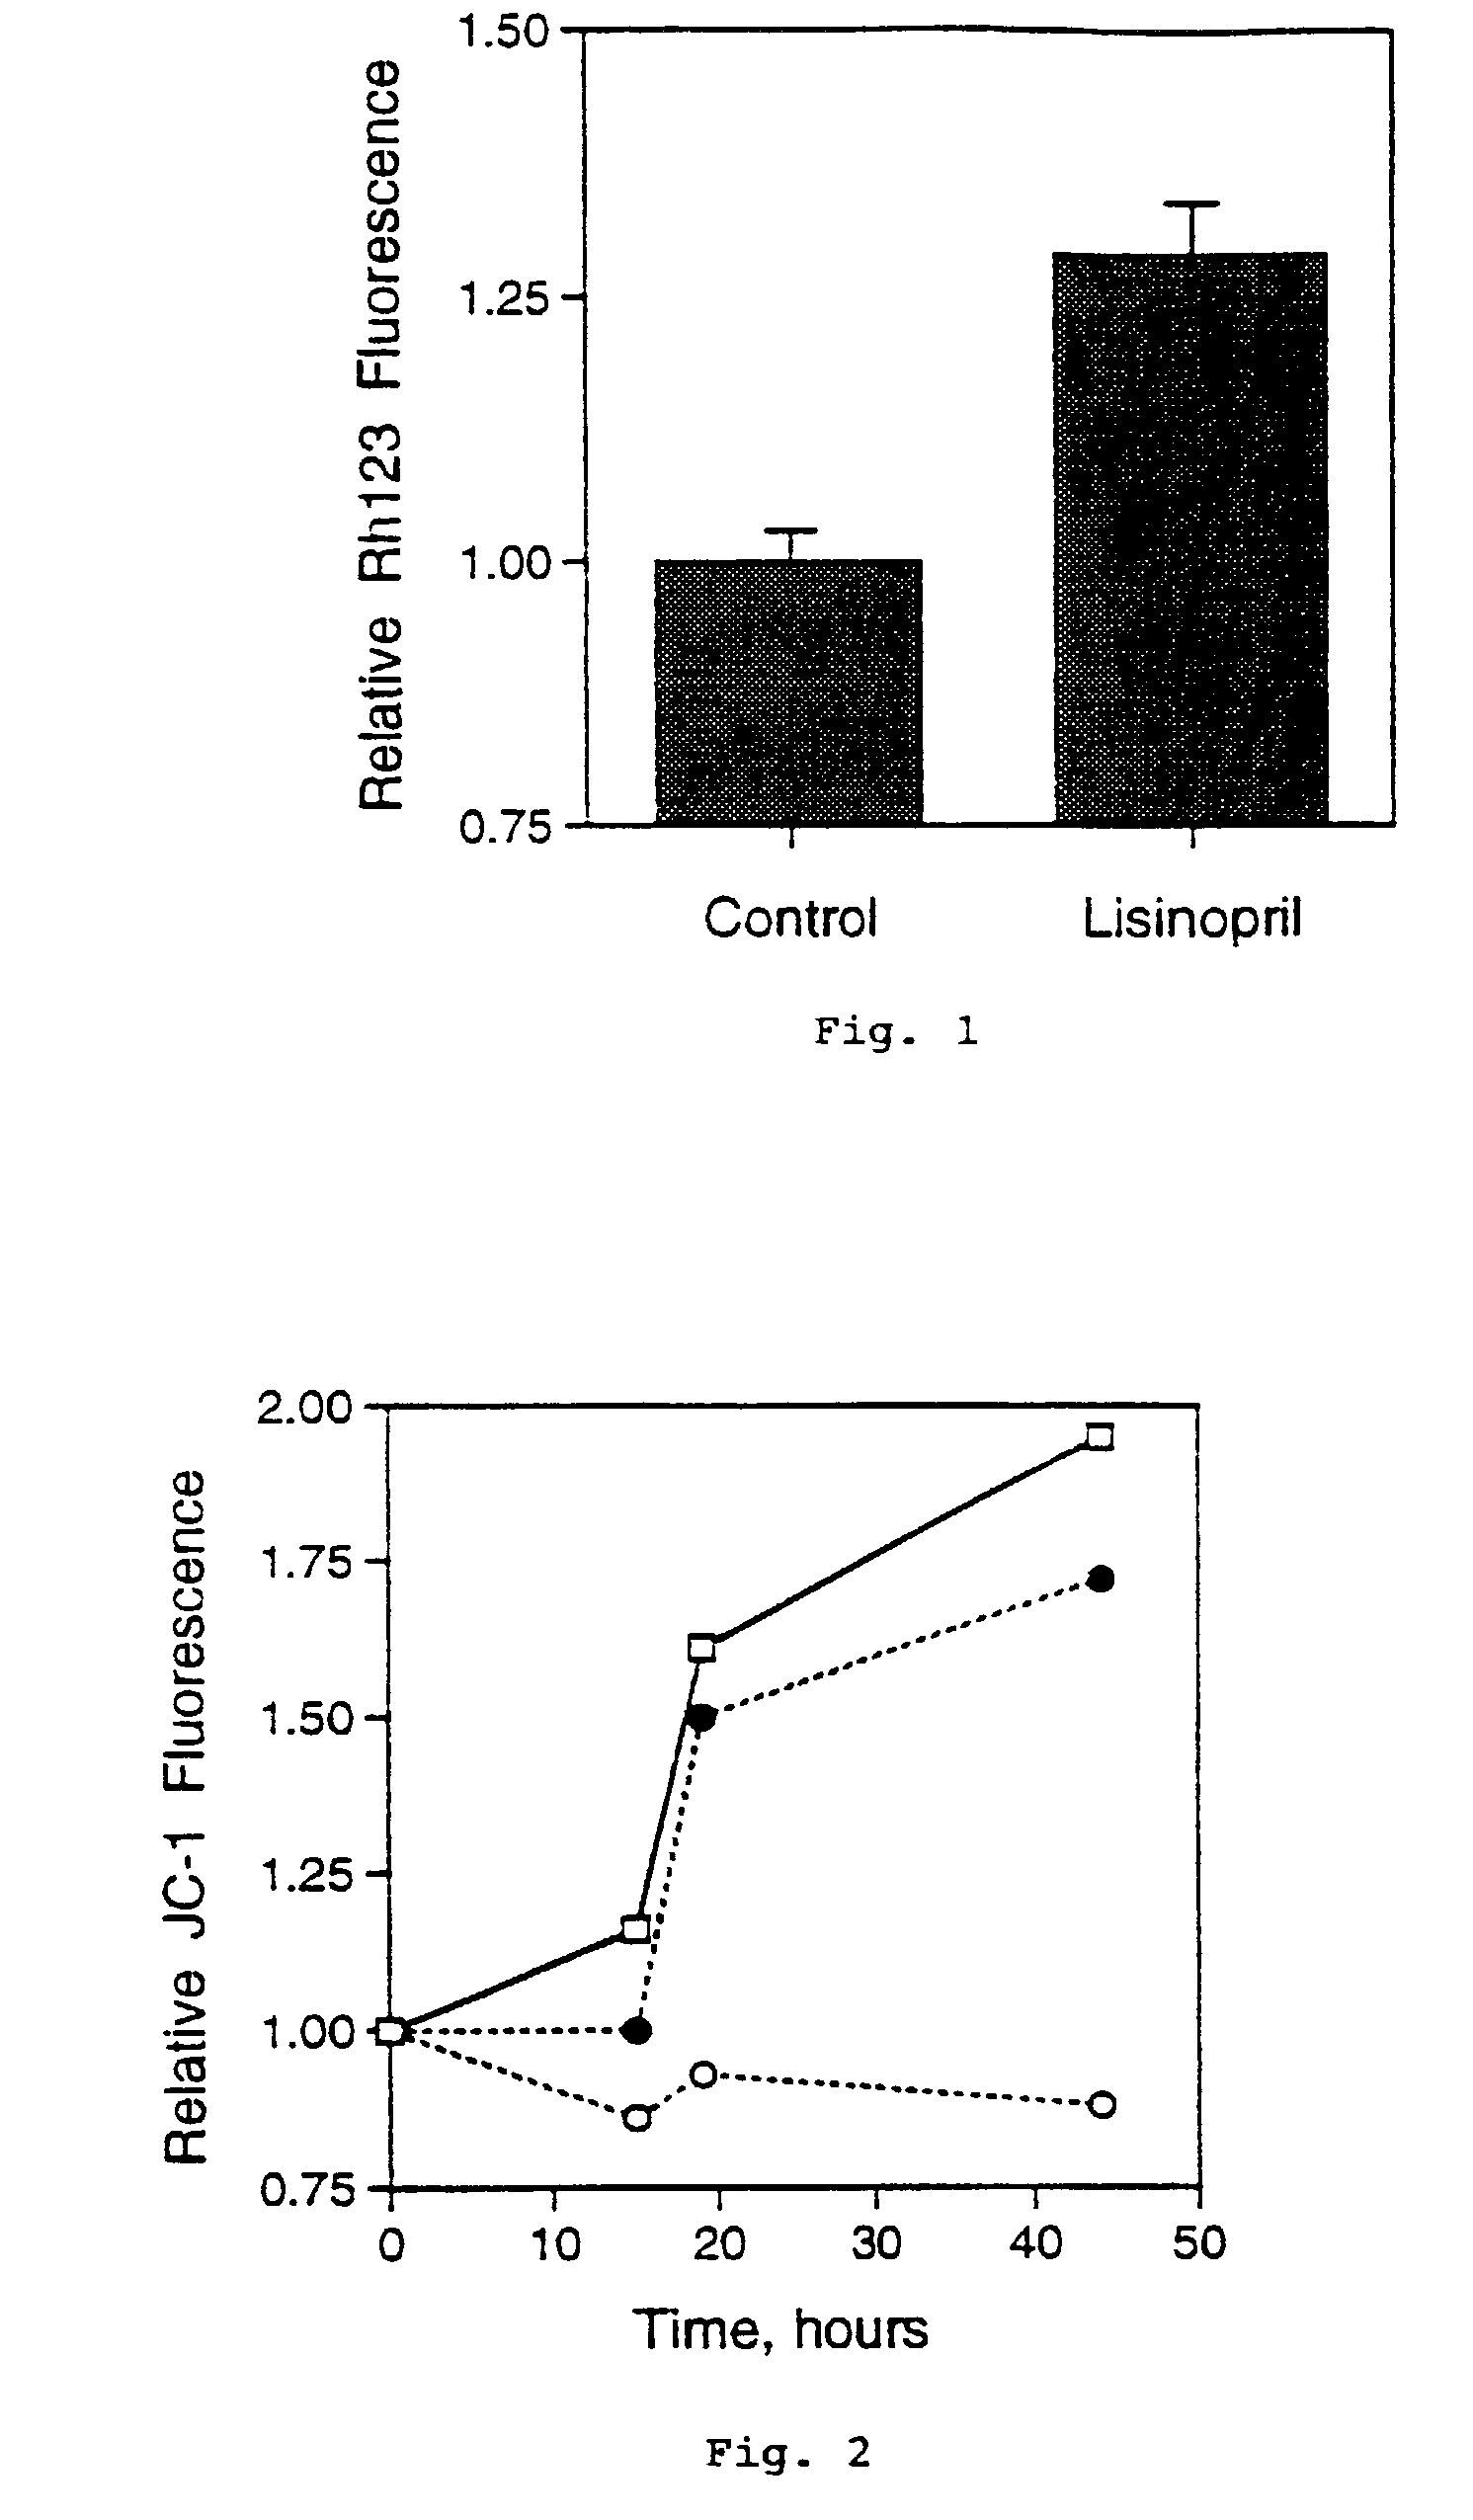 Use of inhibitors of the renin-angiotensin system